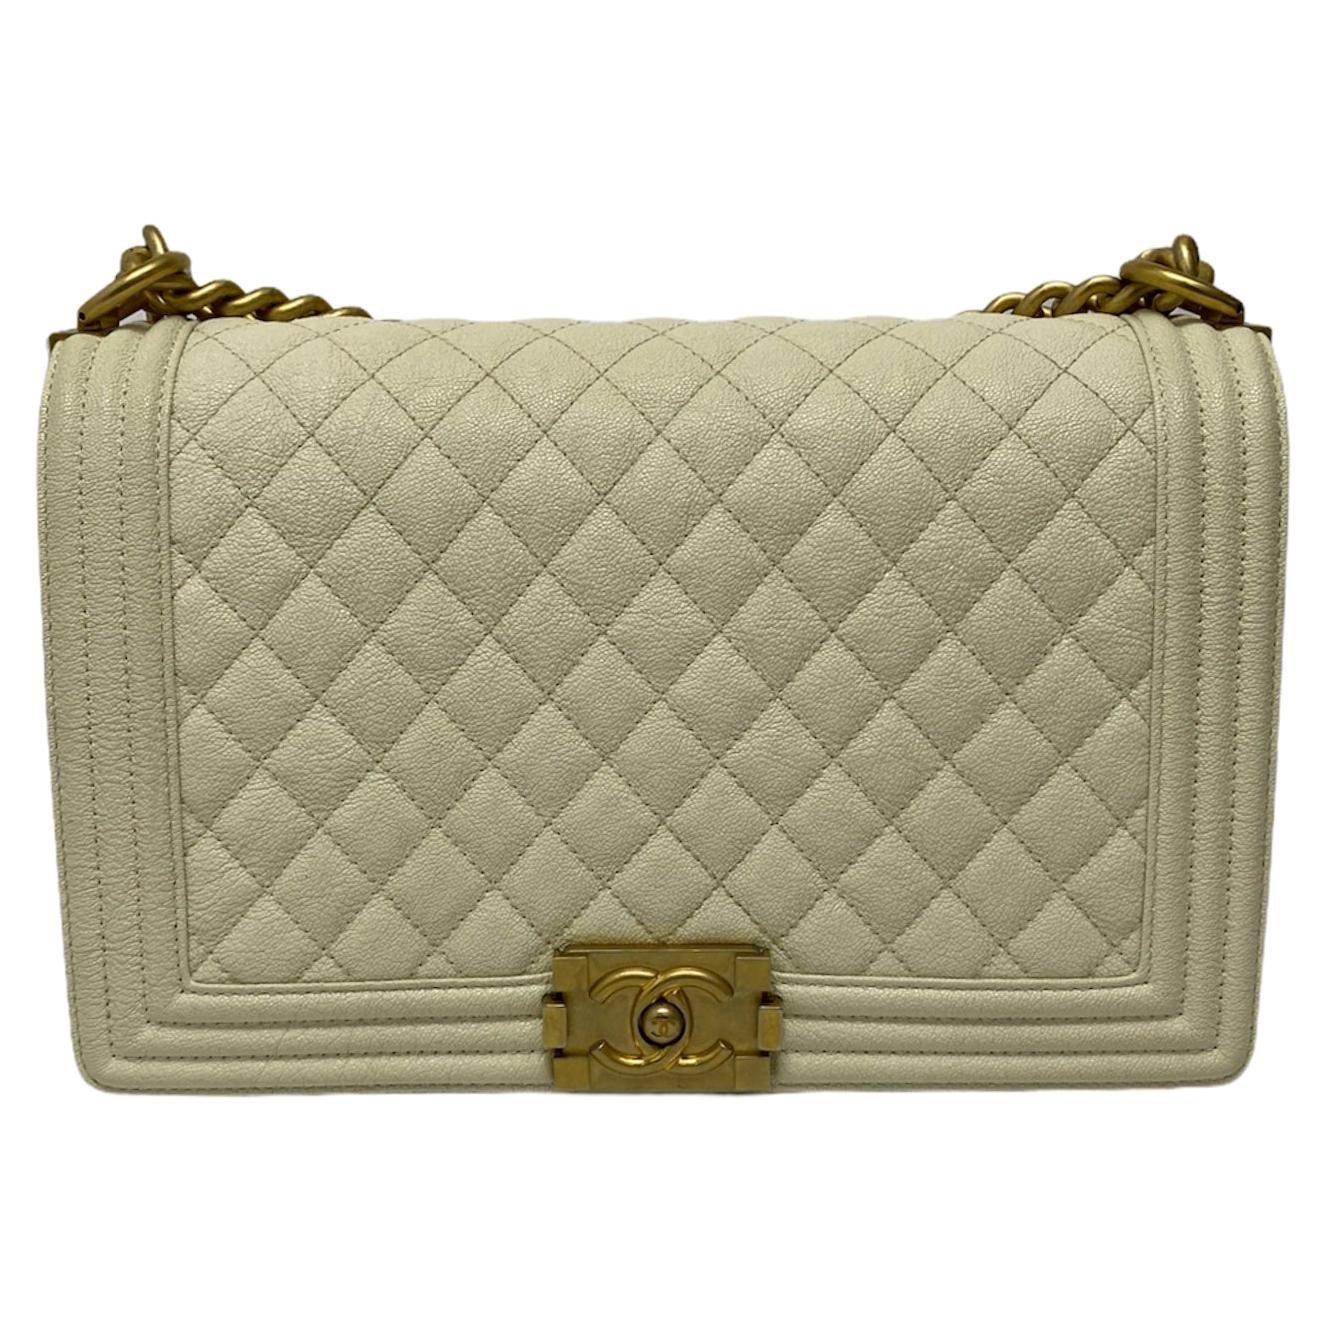 Boy leather crossbody bag Chanel White in Leather - 33243869